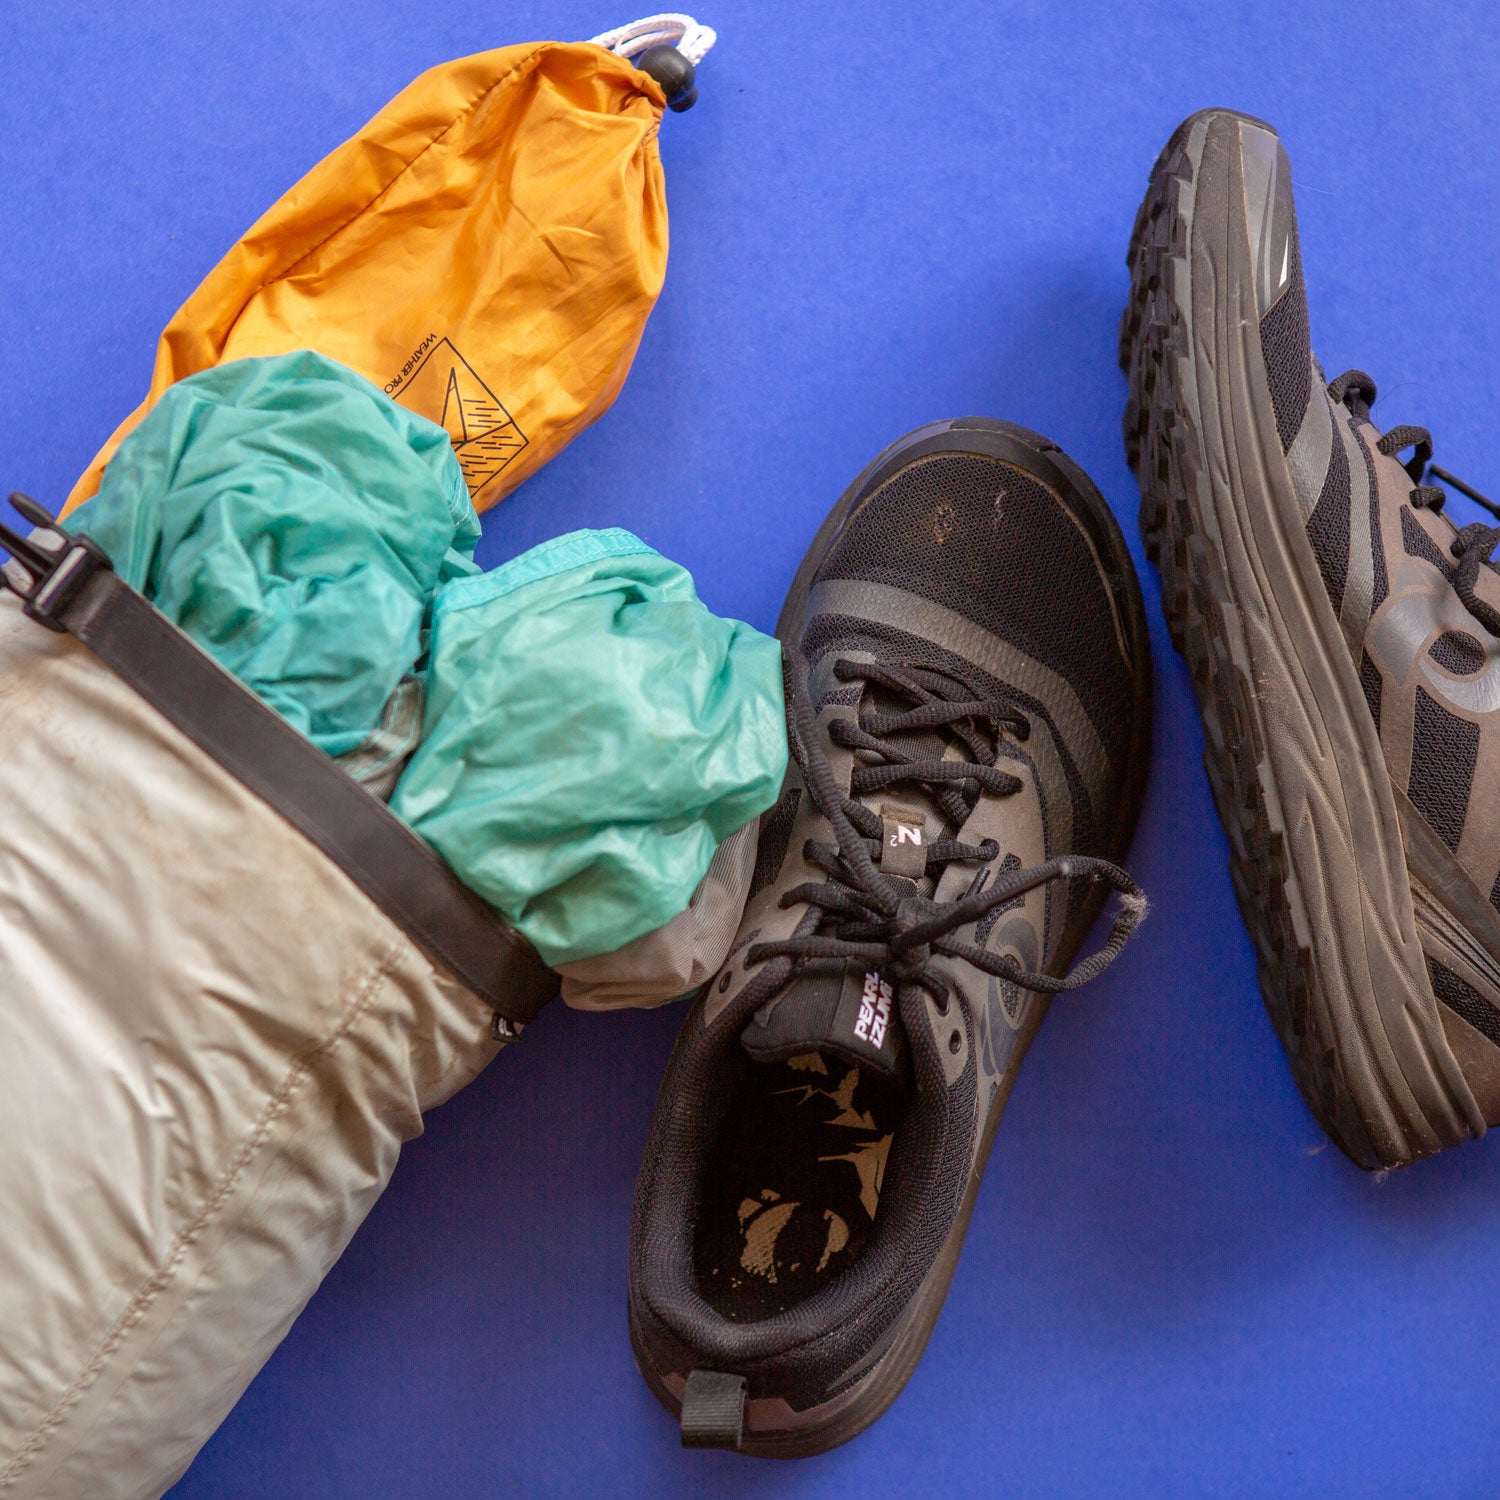 High-End Camping Gear Thats Worth the Splurge